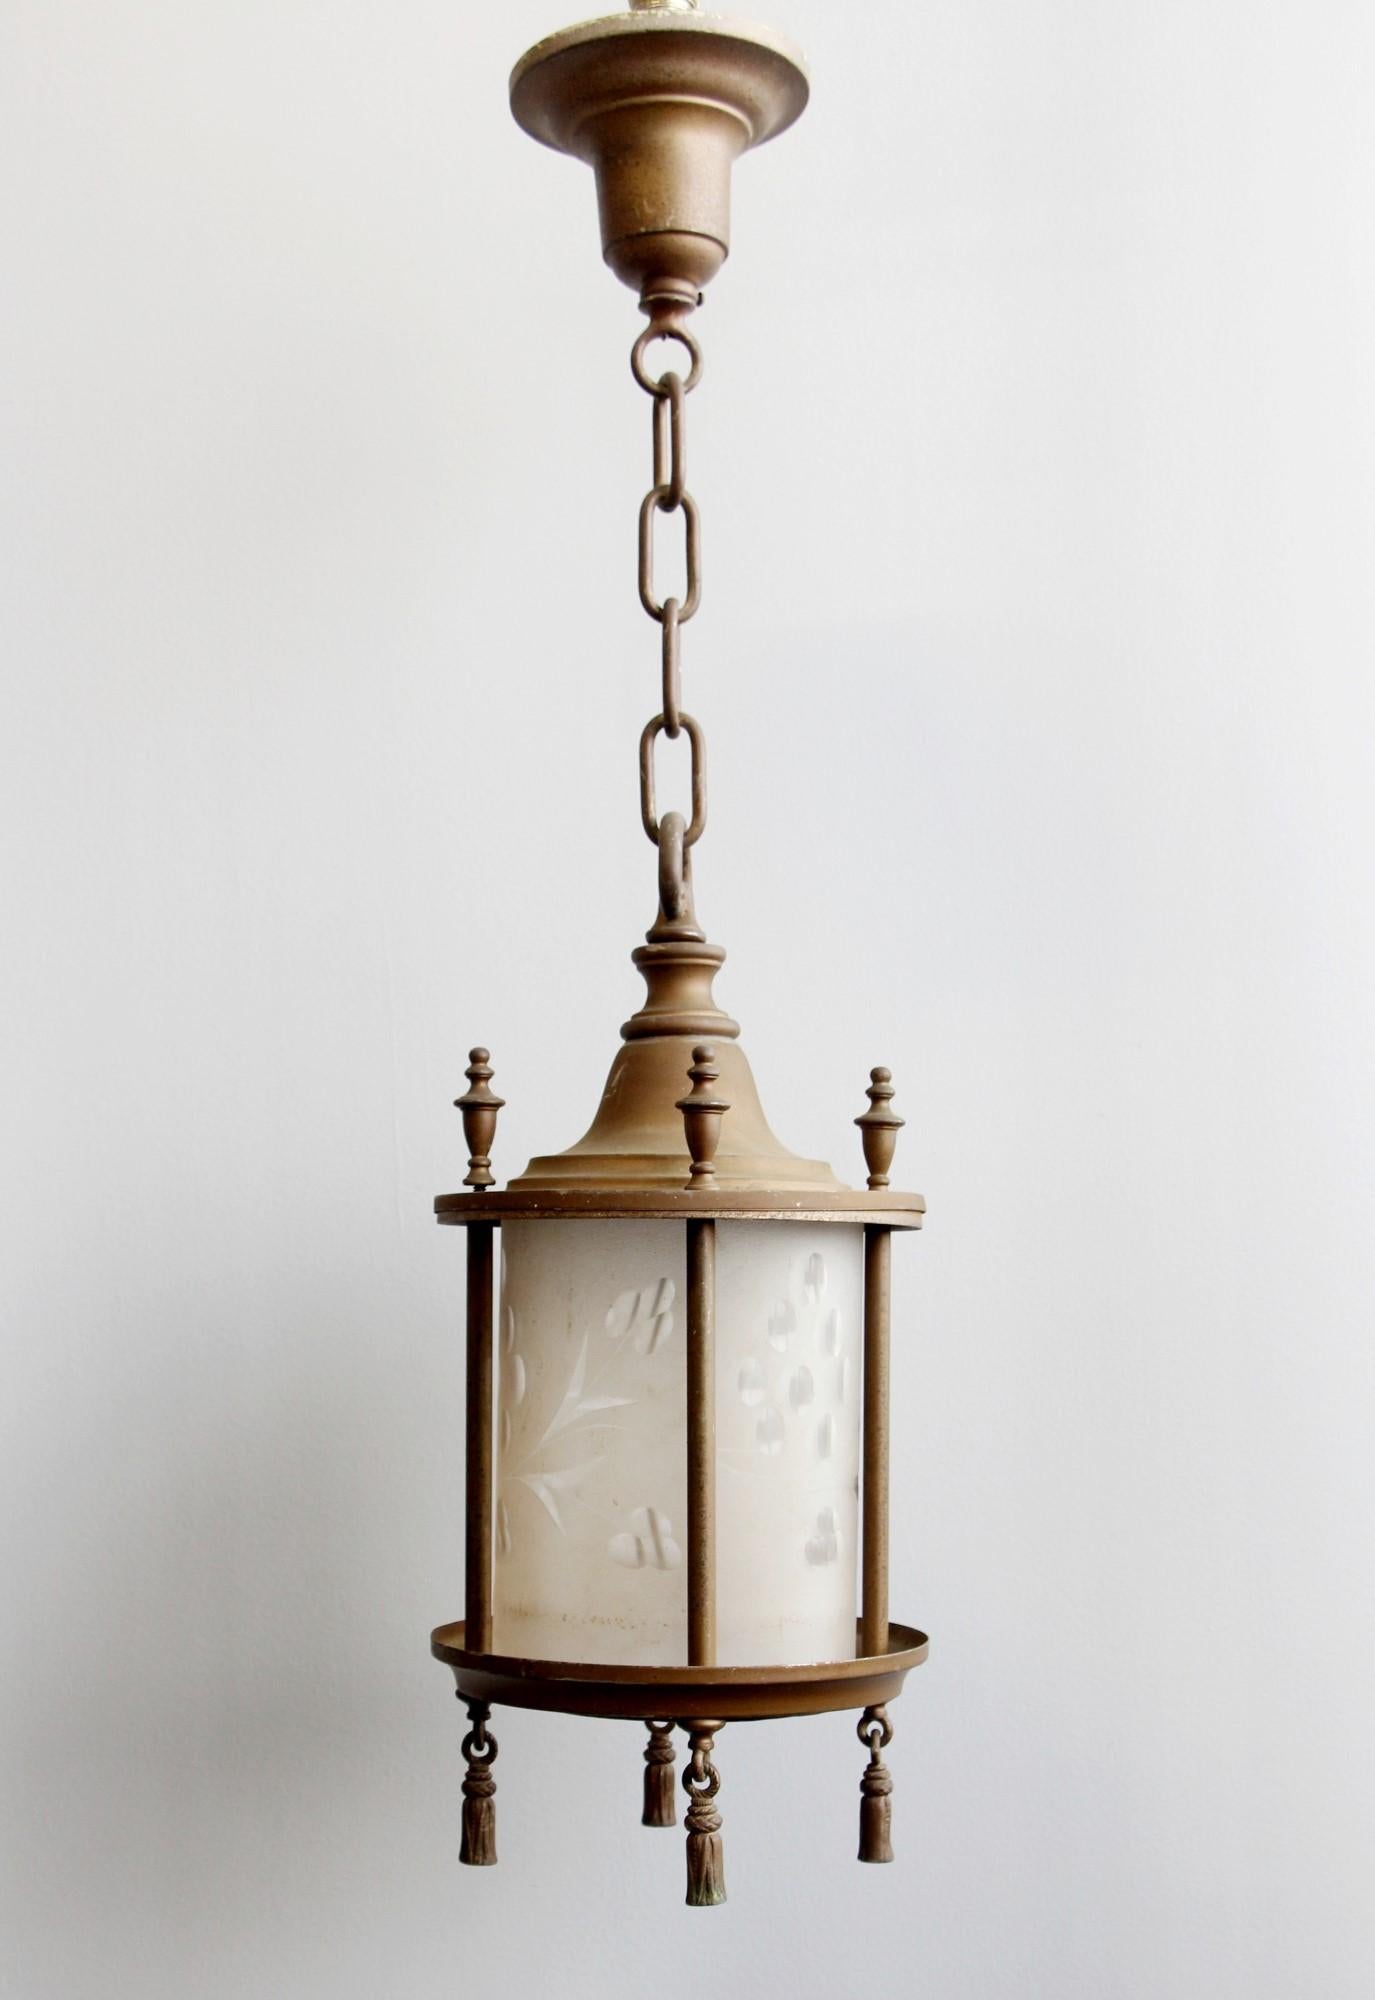 Brass cylinder shaped lantern from the early 20th century with original etched round cylinder glass shade. This can be seen at our 400 Gilligan St location in Scranton, PA.